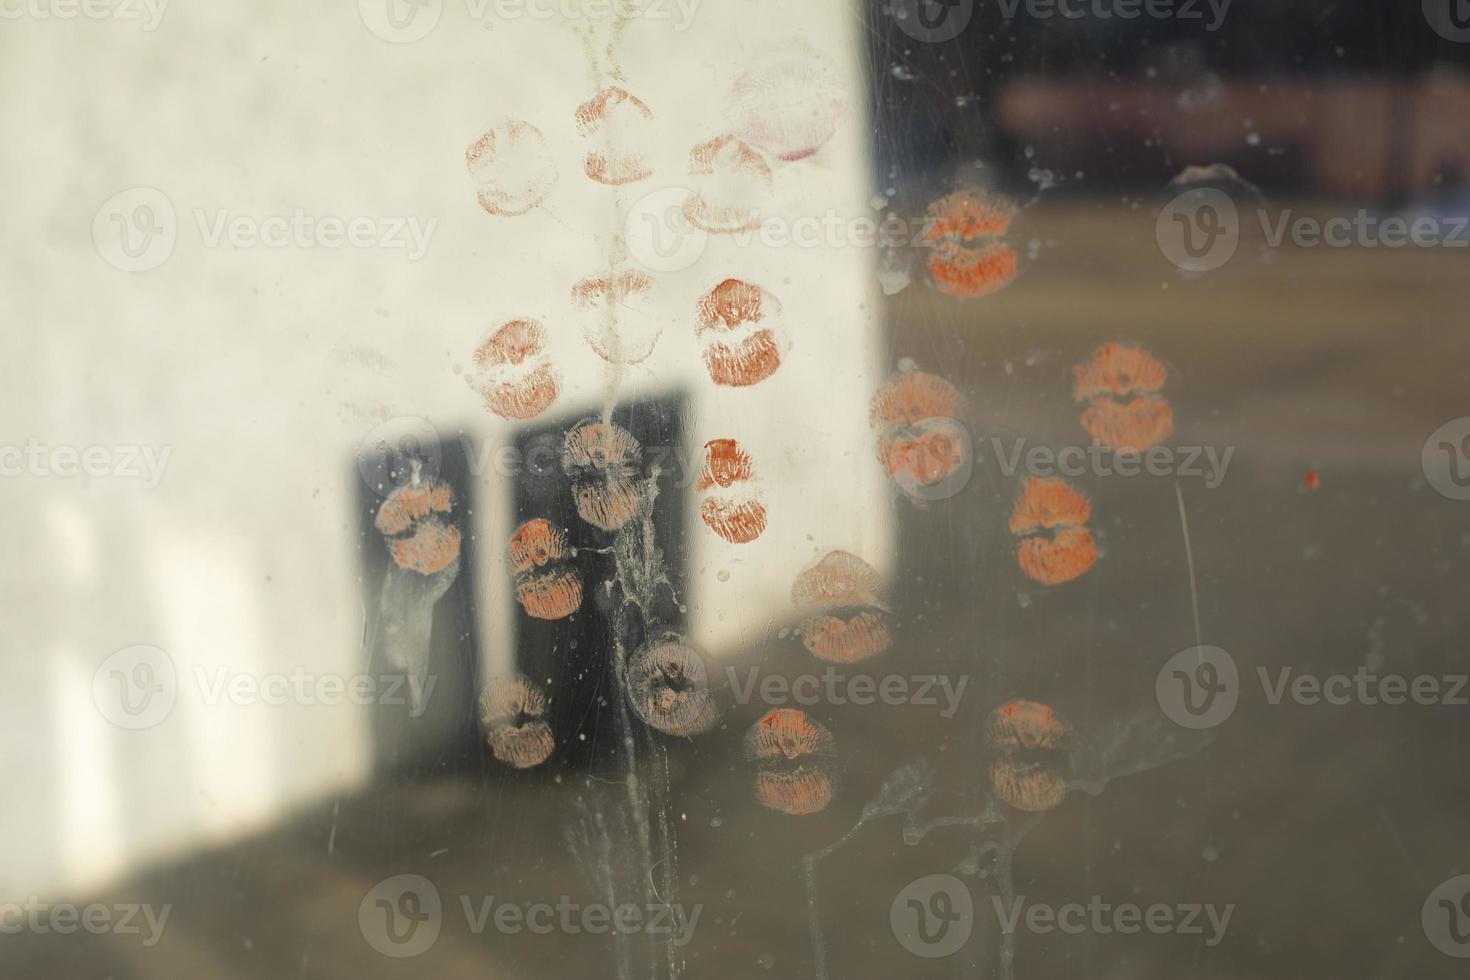 Lipstick marks on mirror. Lots of kisses on glass. photo